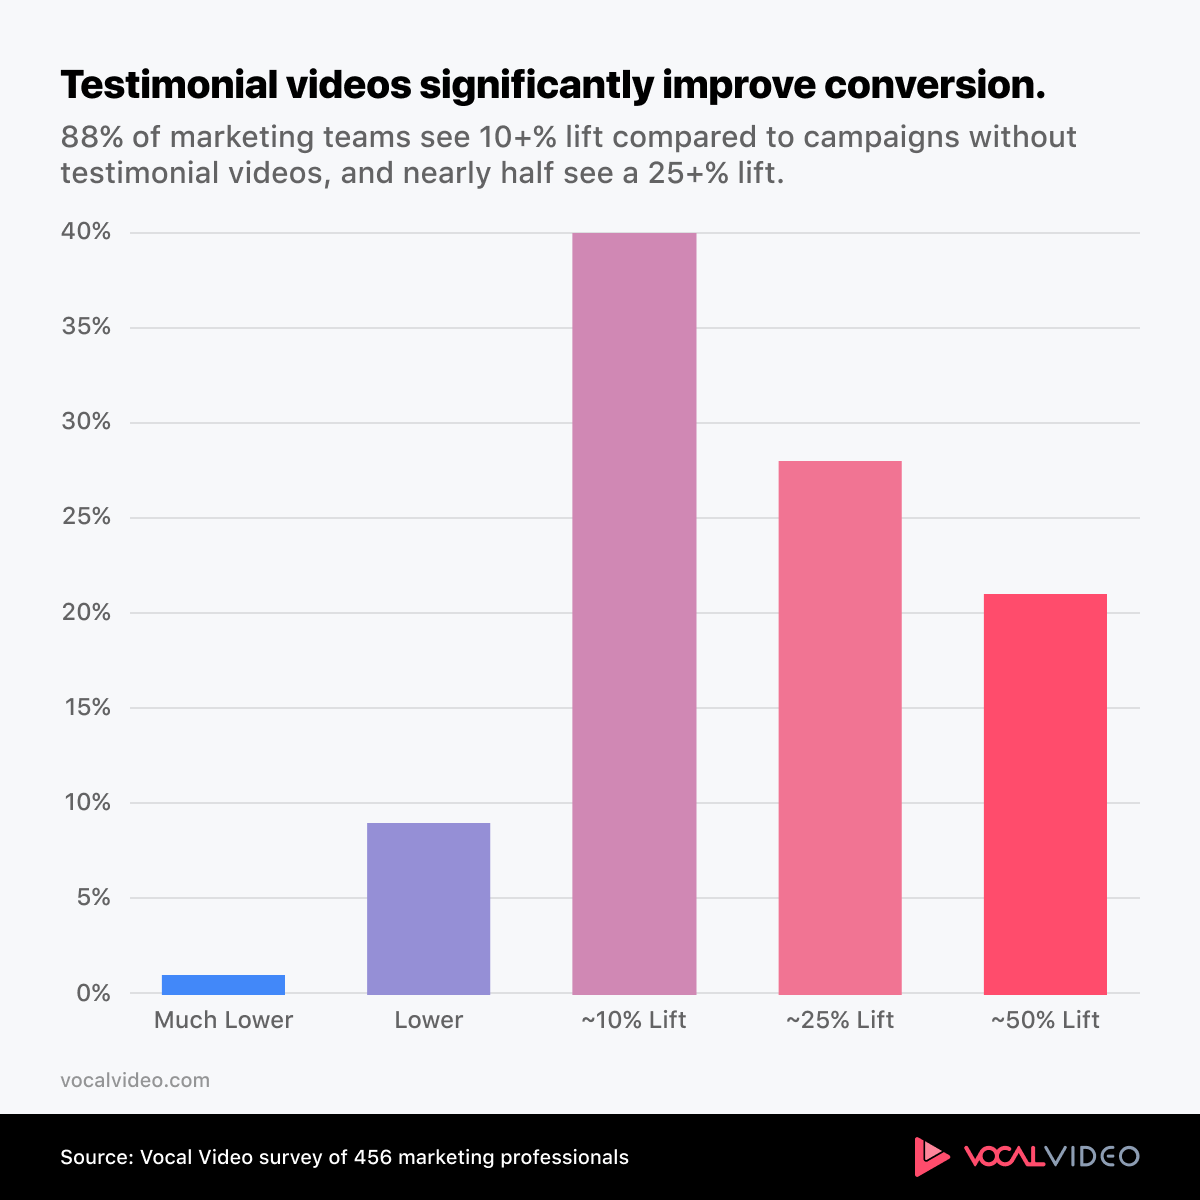 Testimonial Videos significantly increase conversion: 88% of marketing teams see a 10+% lift compared to campaigns without testimonial videos, and nearly half see a 25+% lift.